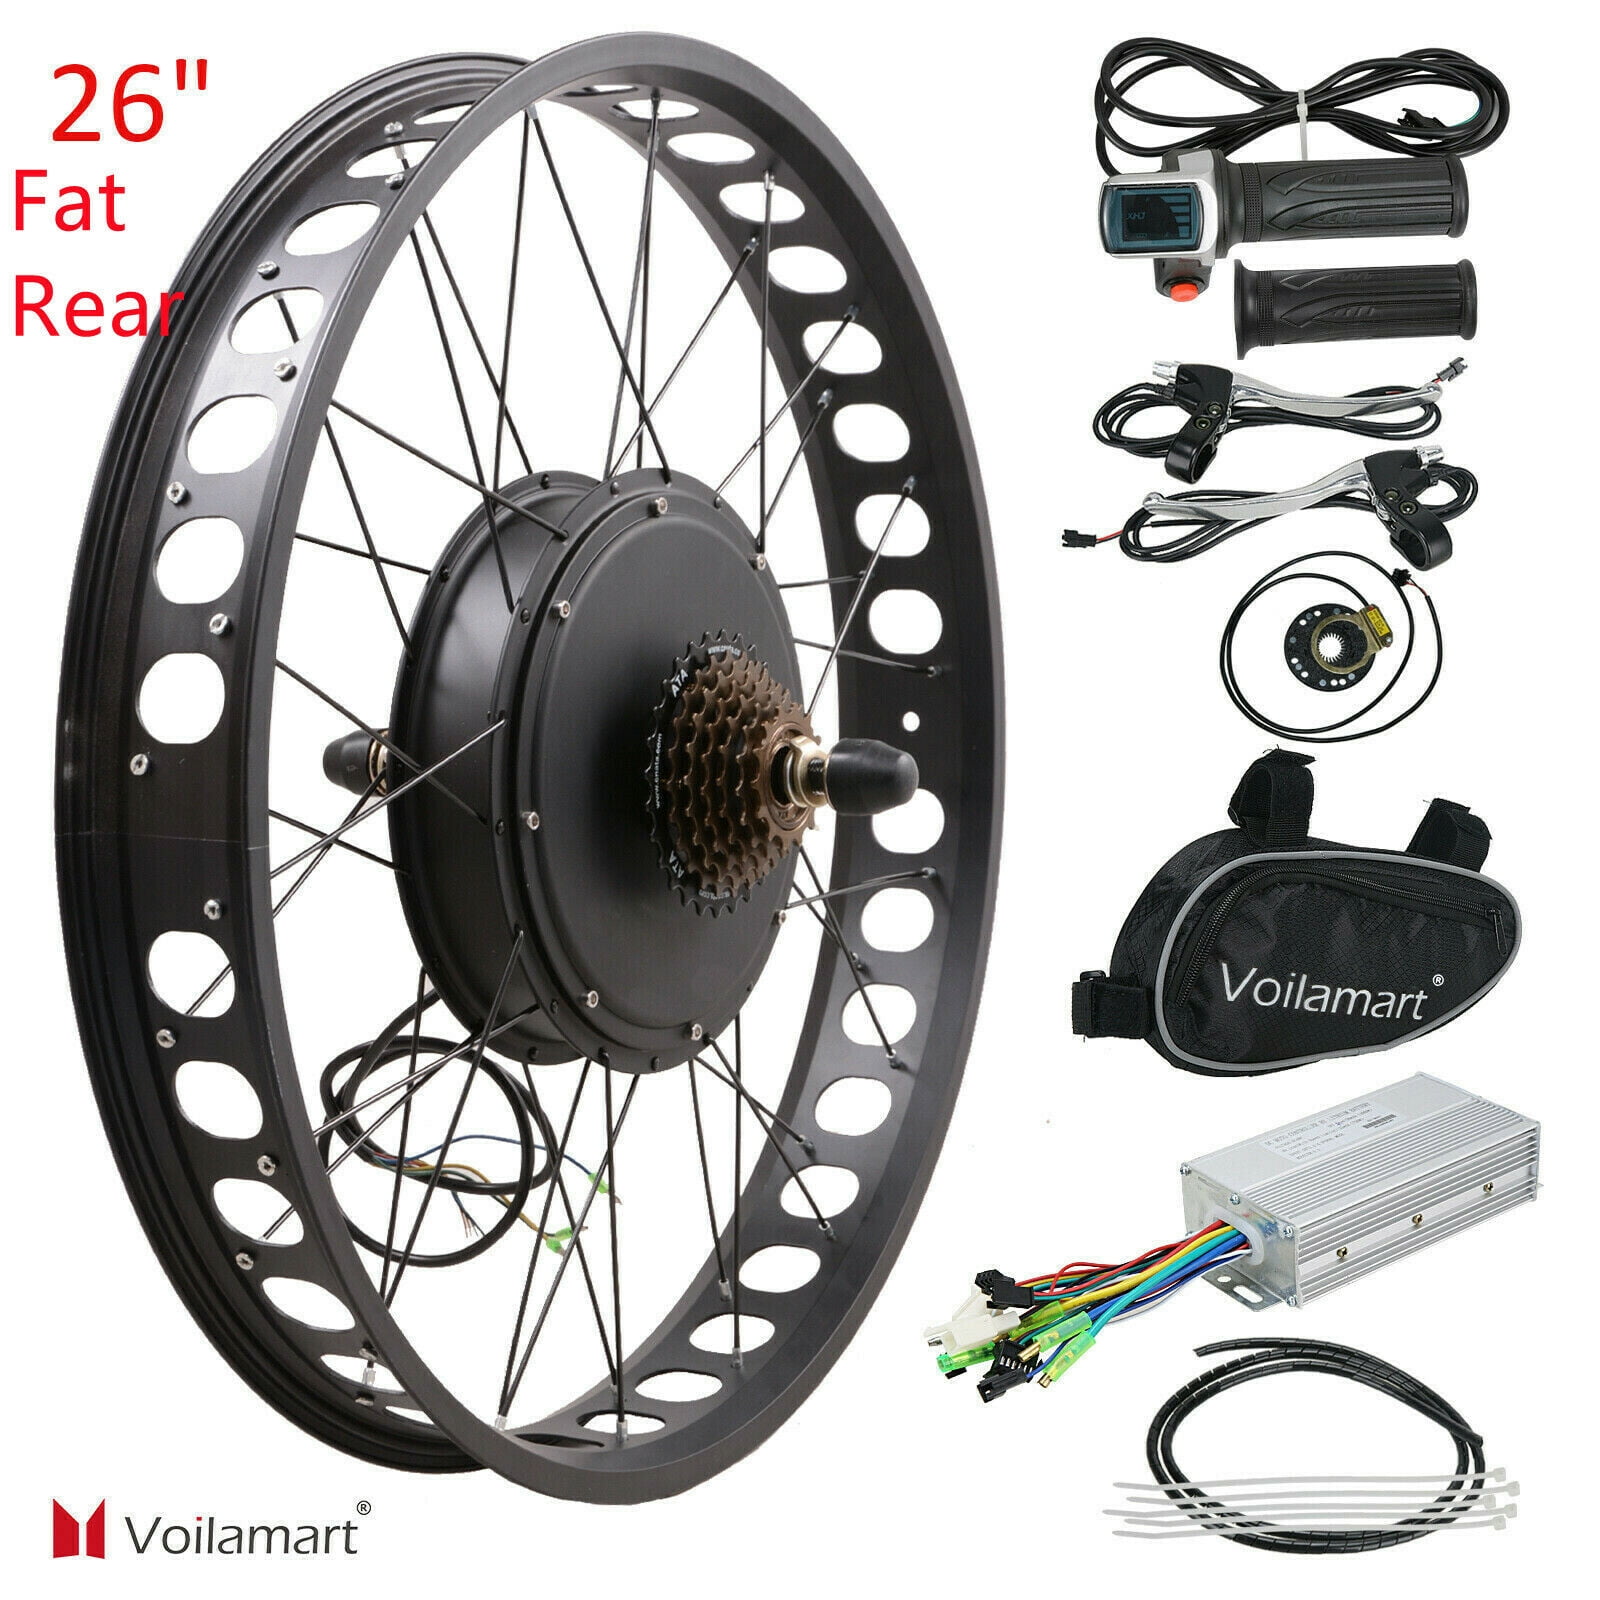 JauoPay 48V 1000W Electric Bicycle Conversion Motor Kit 26" Rear Fat Tire LCD 